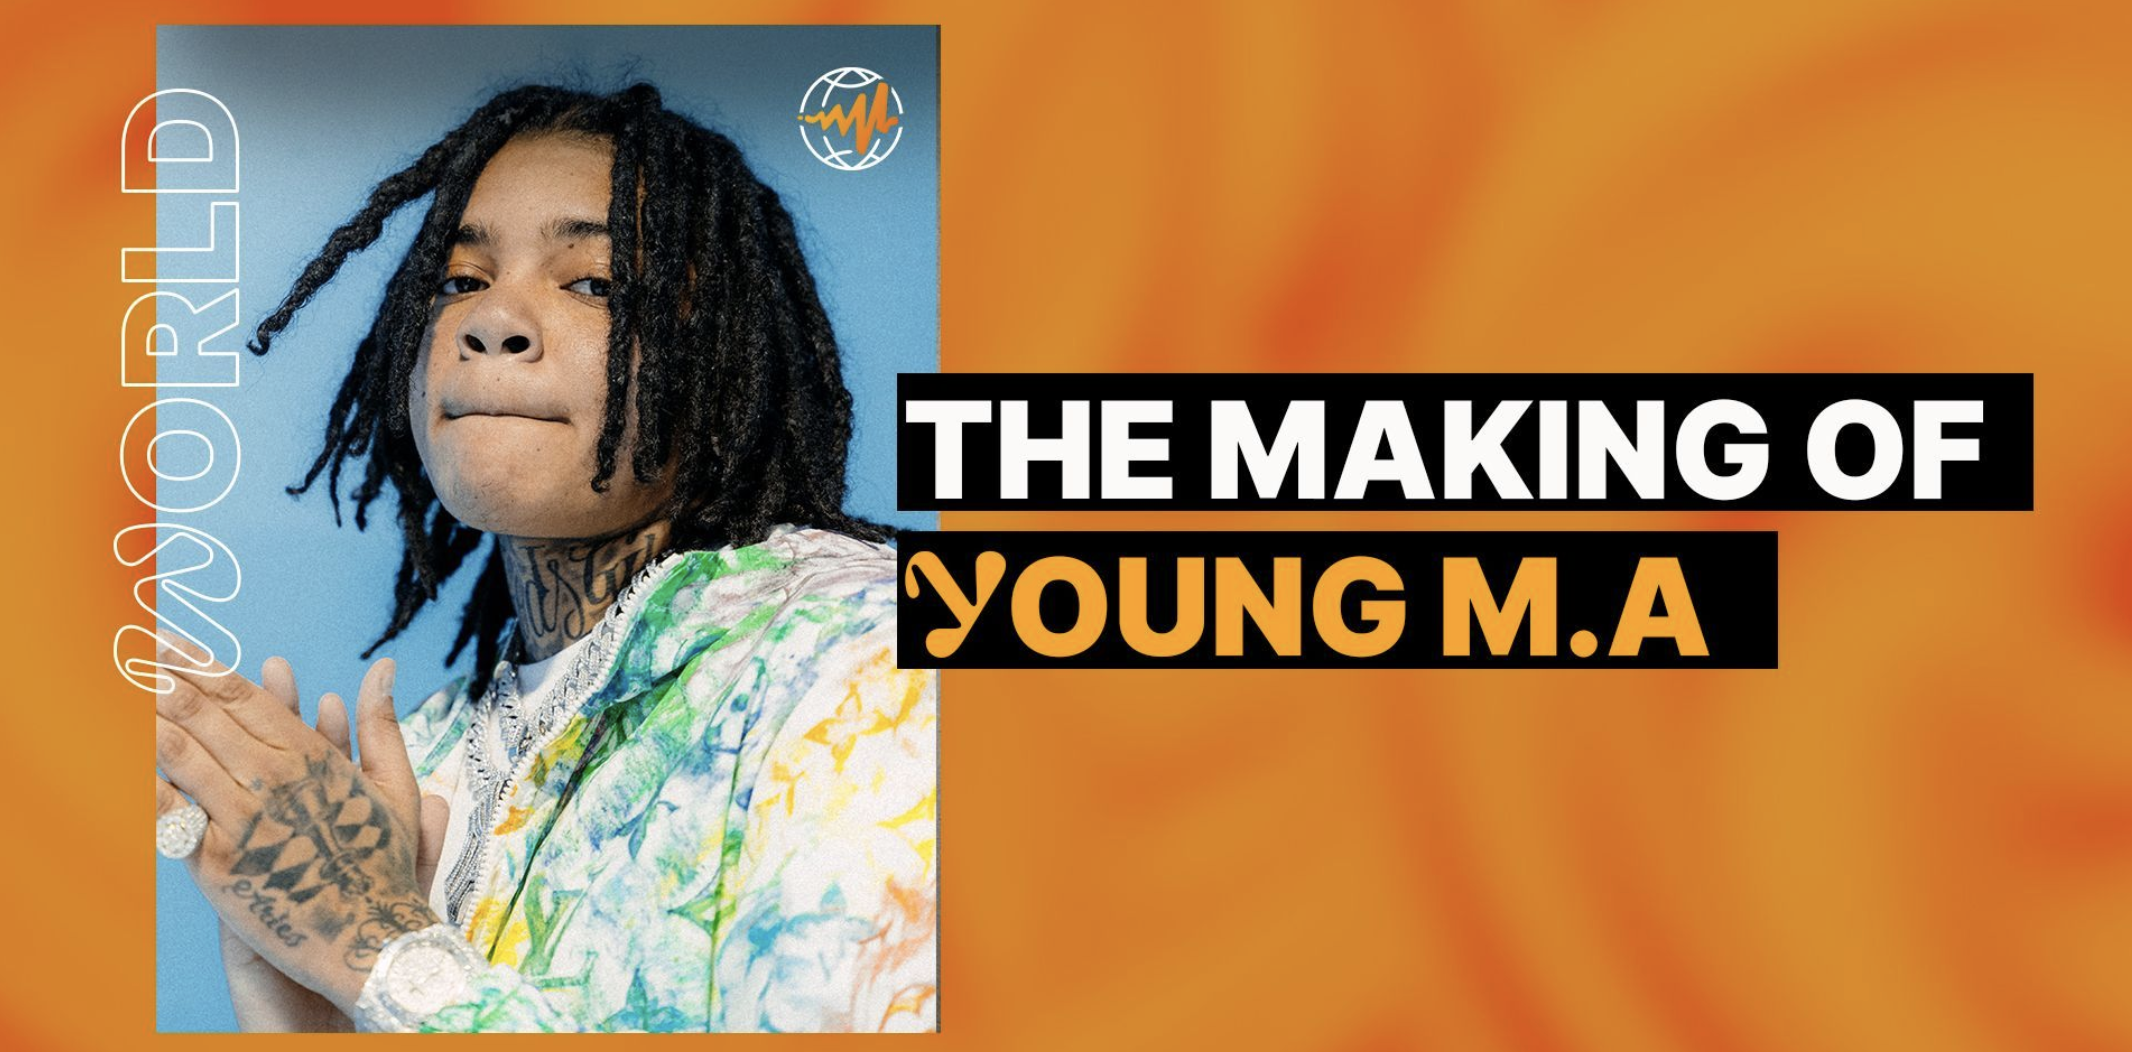   The Making of Young M.A  